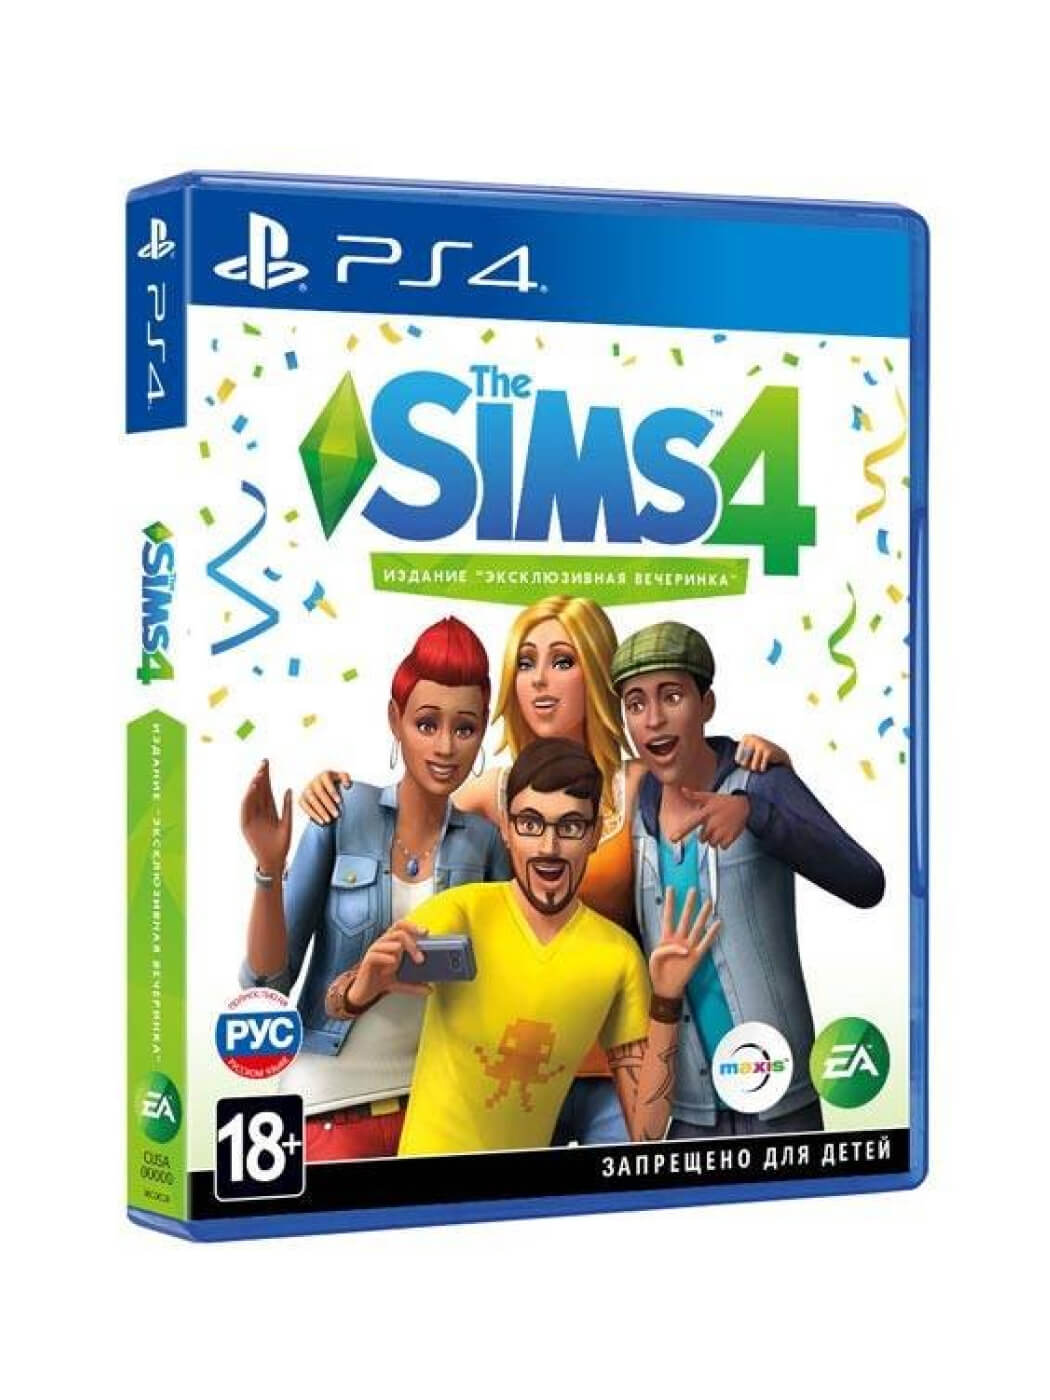 Симс 4 на пс5. SIMS 4 ps4. SIMS 4 ps4 диск. Симс 4 на ПС 4. Симс 4 диск на ПС 4.